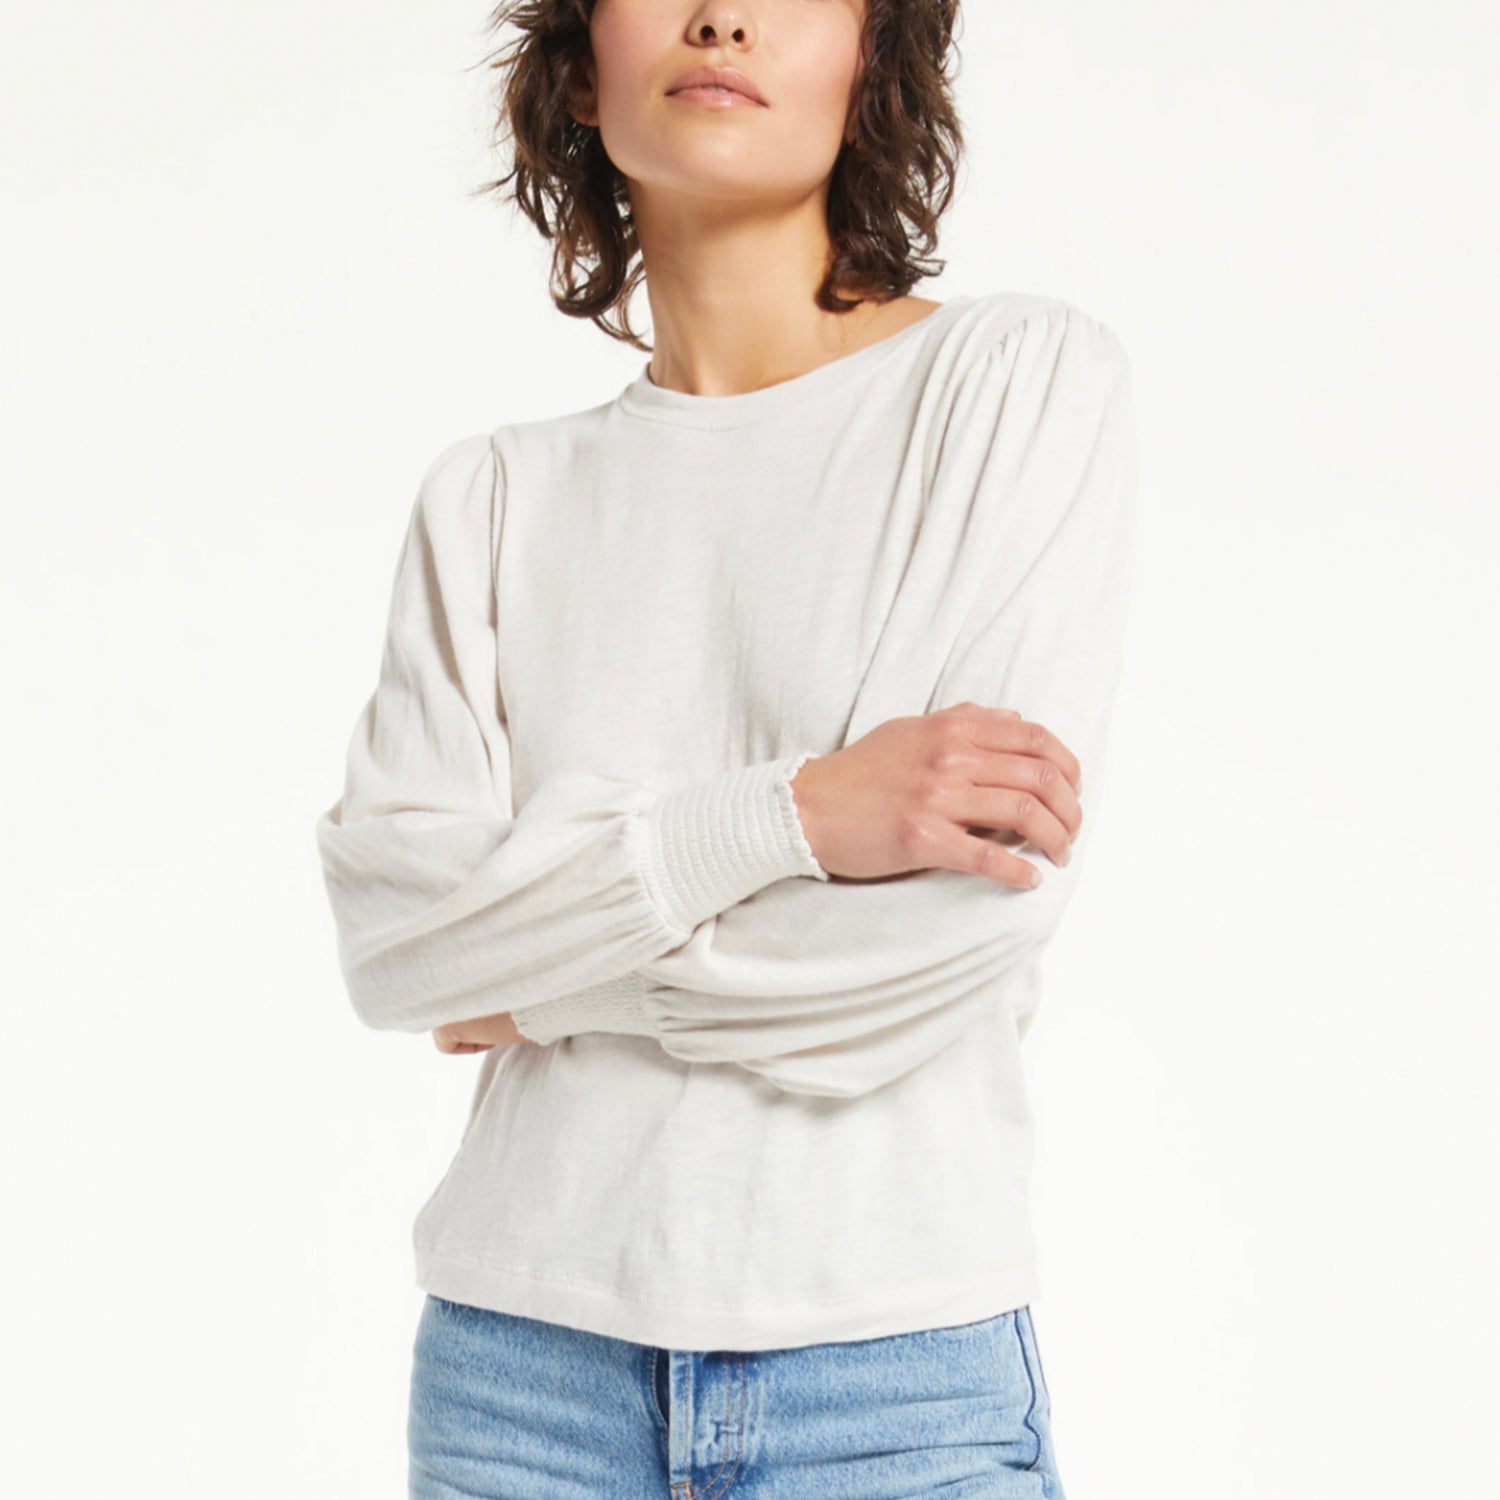 Z Supply Rebel Brushed Slub Top. A simple date night top that you can’t go wrong with! The Rebel top creates an elevated look and is incredibly comfortable